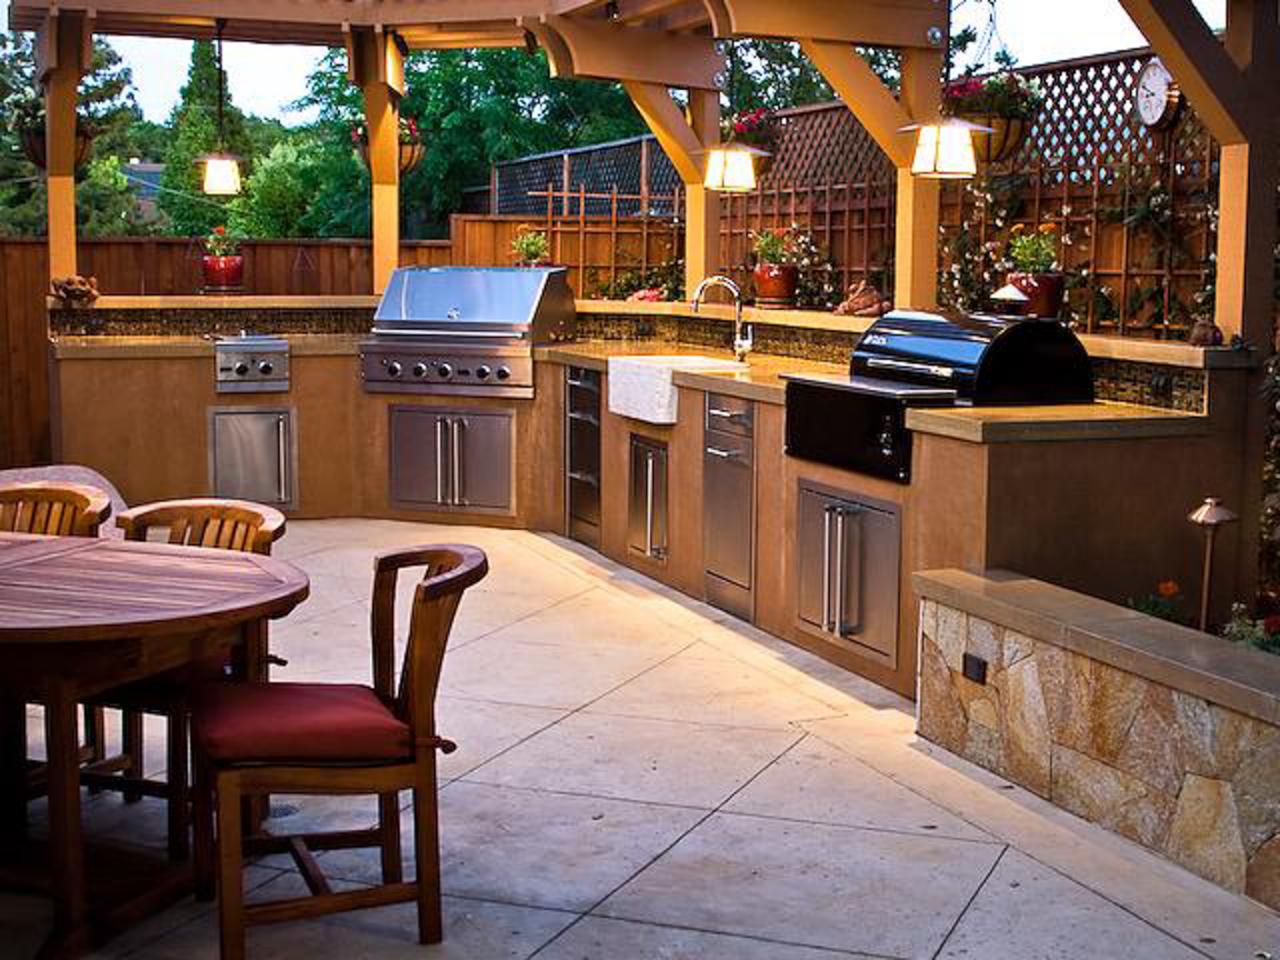 rms_outdoor_kitchen-Trish-Danby_s4x3